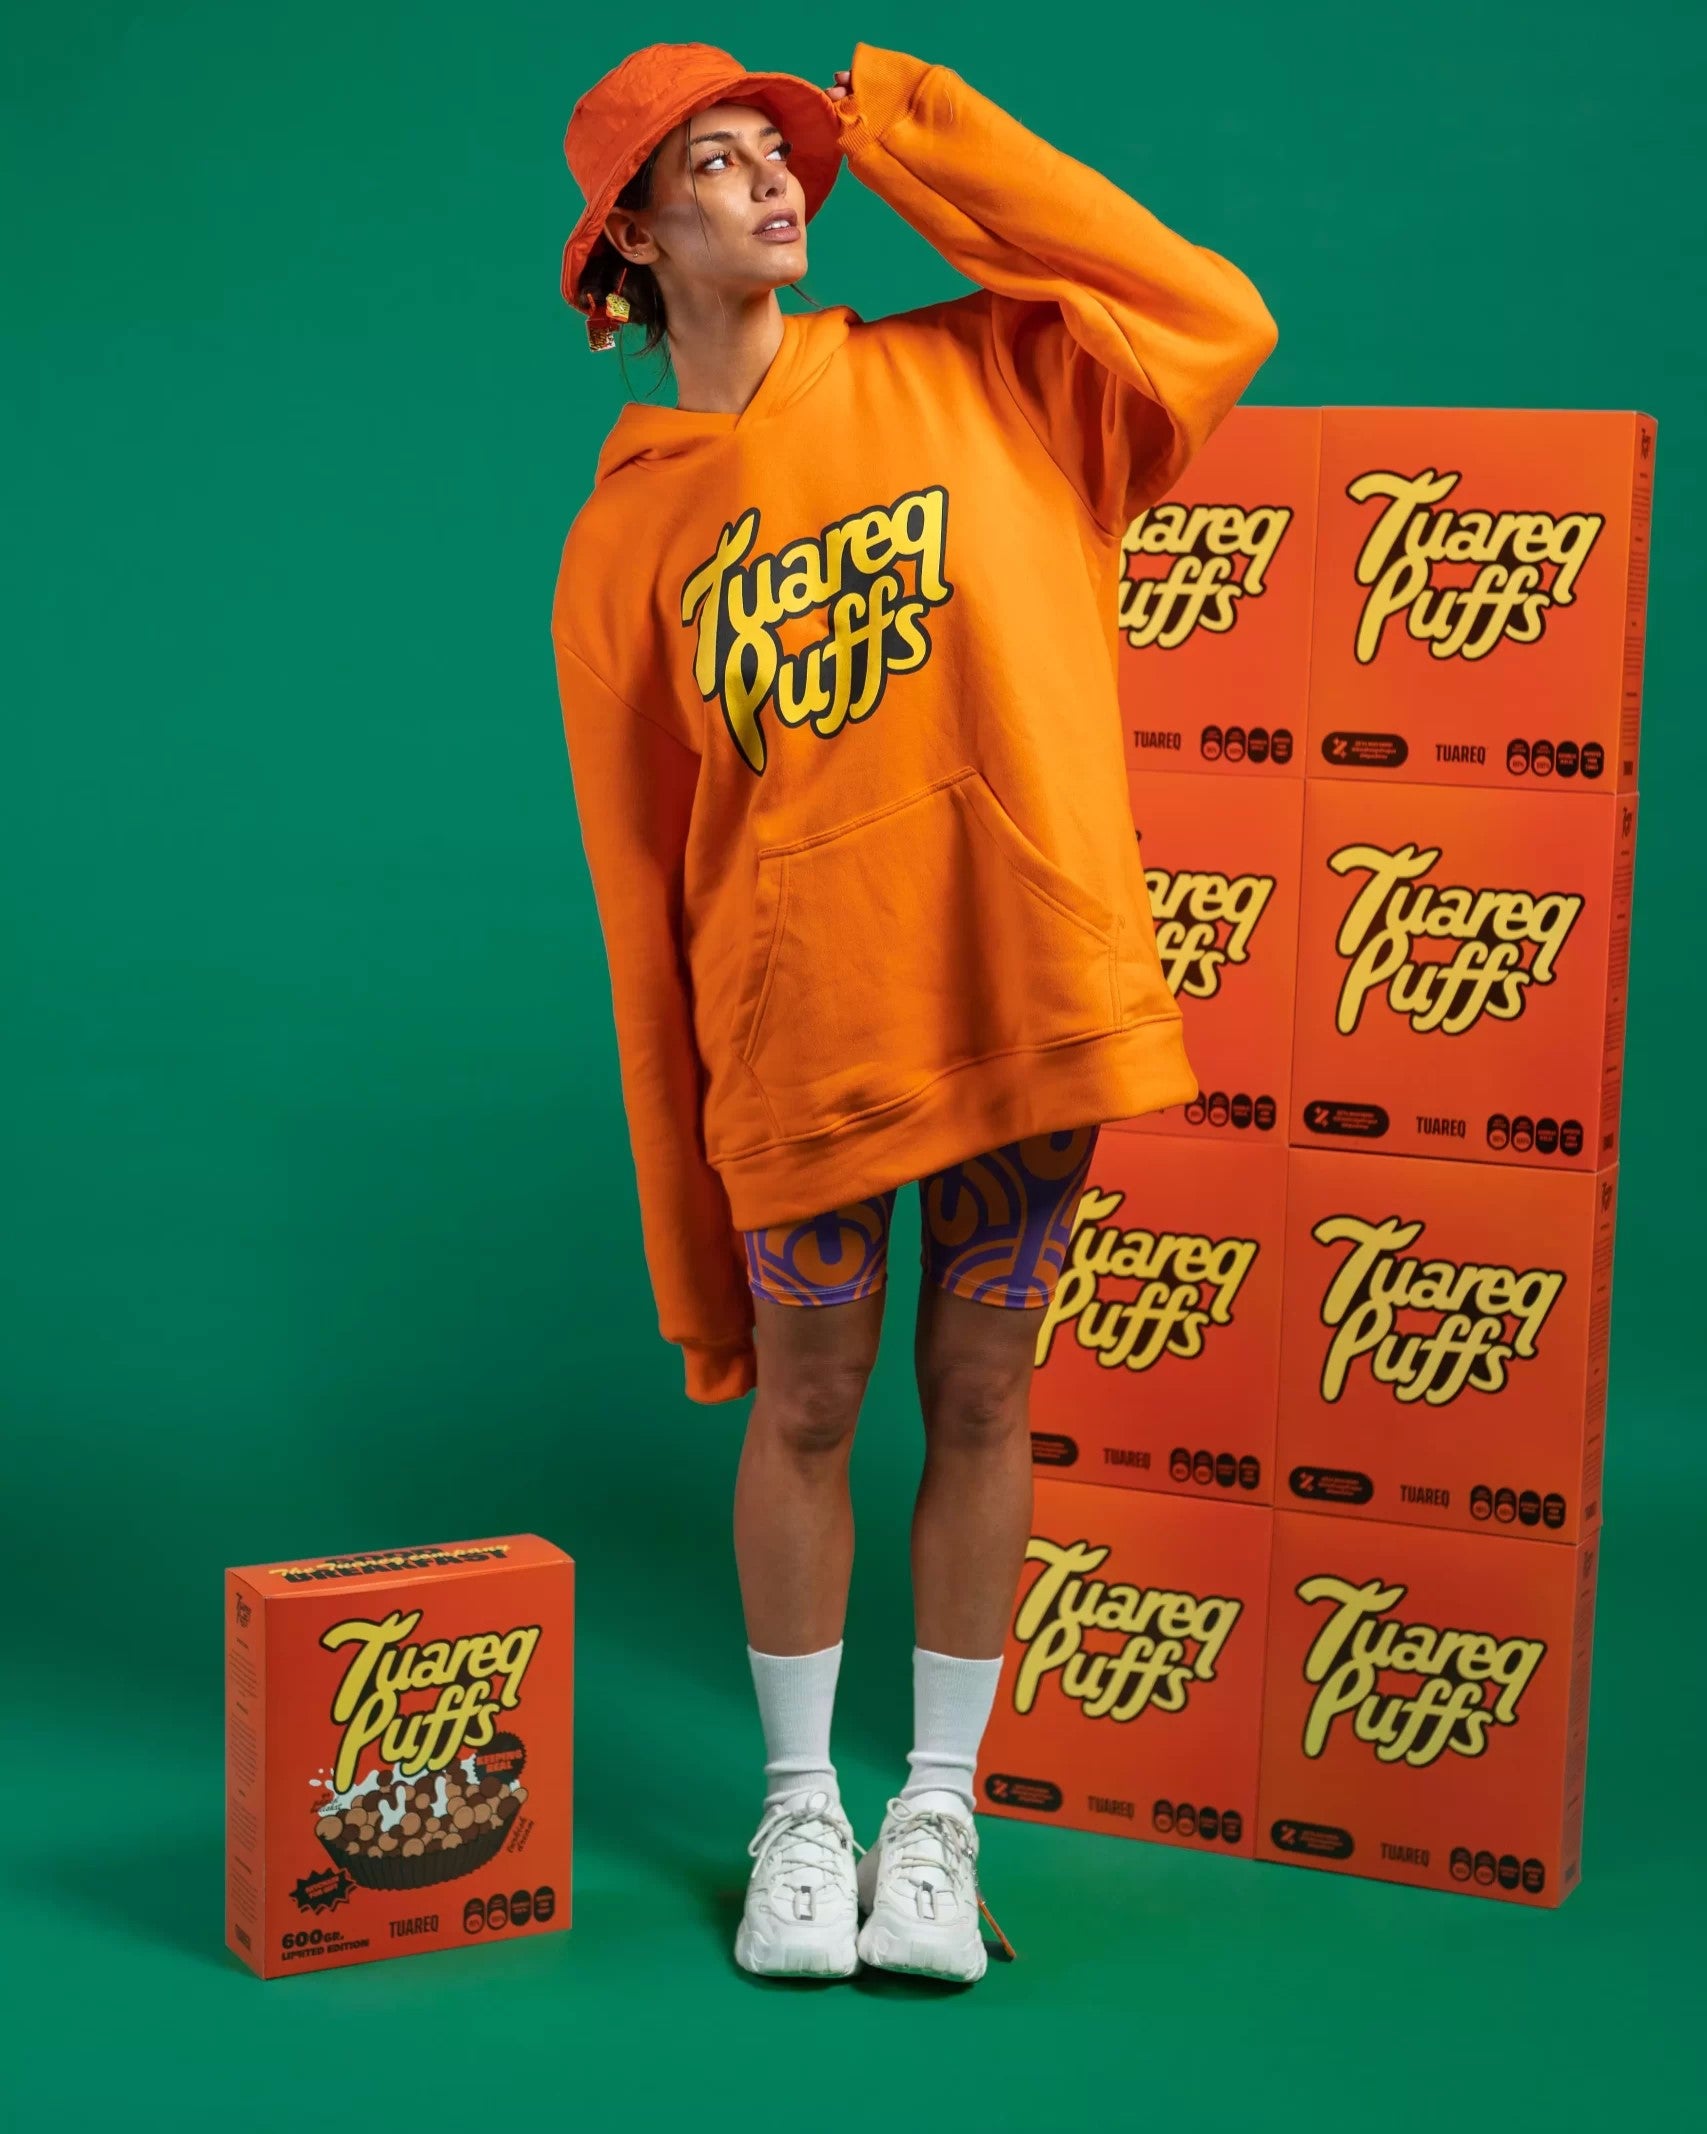 OVERSIZED HOODIE [ PUFFS REESES CEREALS ] 2.0